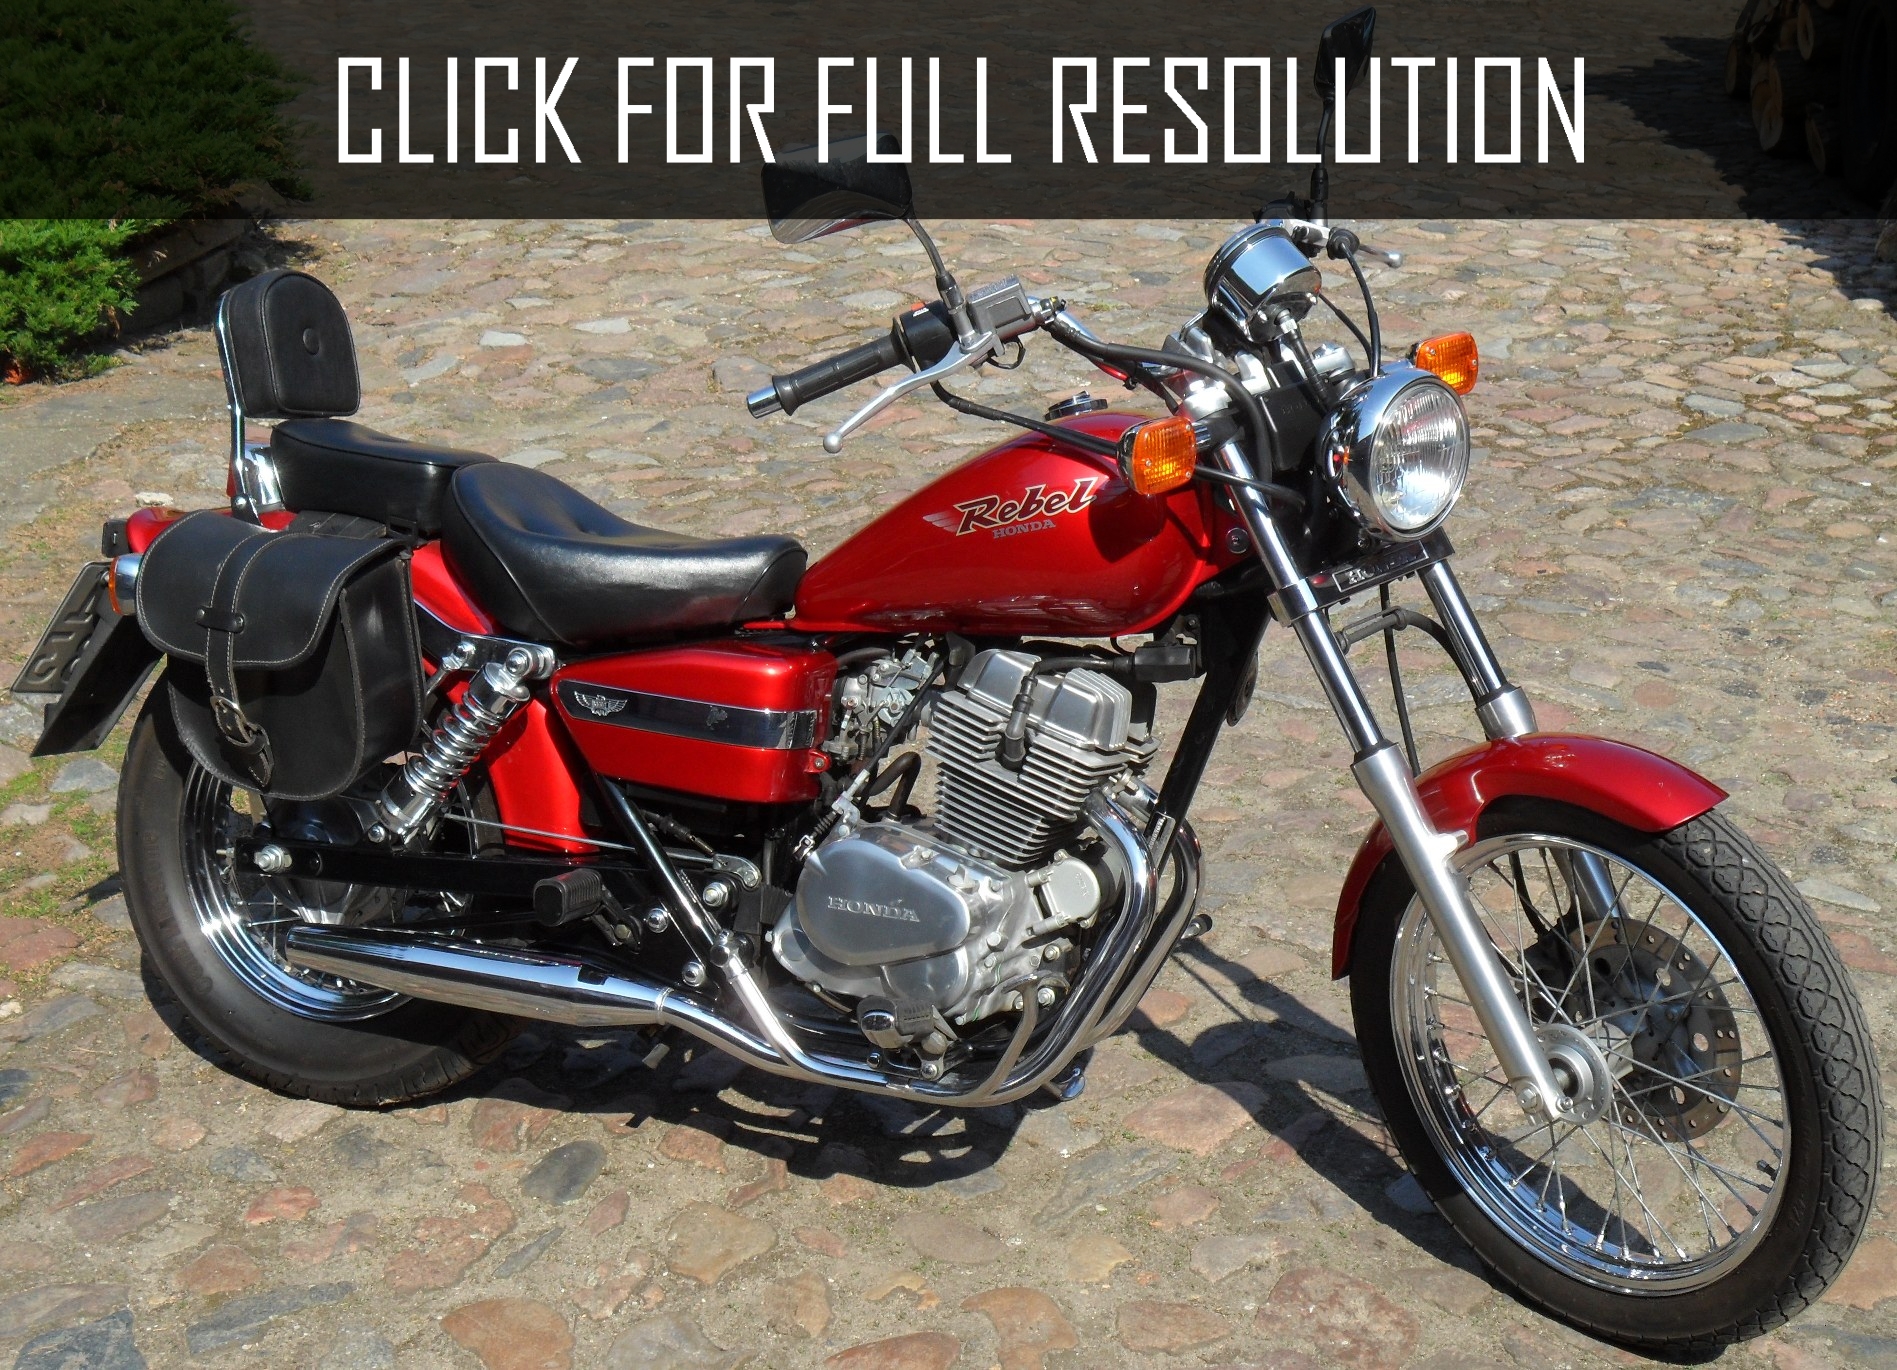 2003 Honda Rebel 250 - news, reviews, msrp, ratings with amazing images